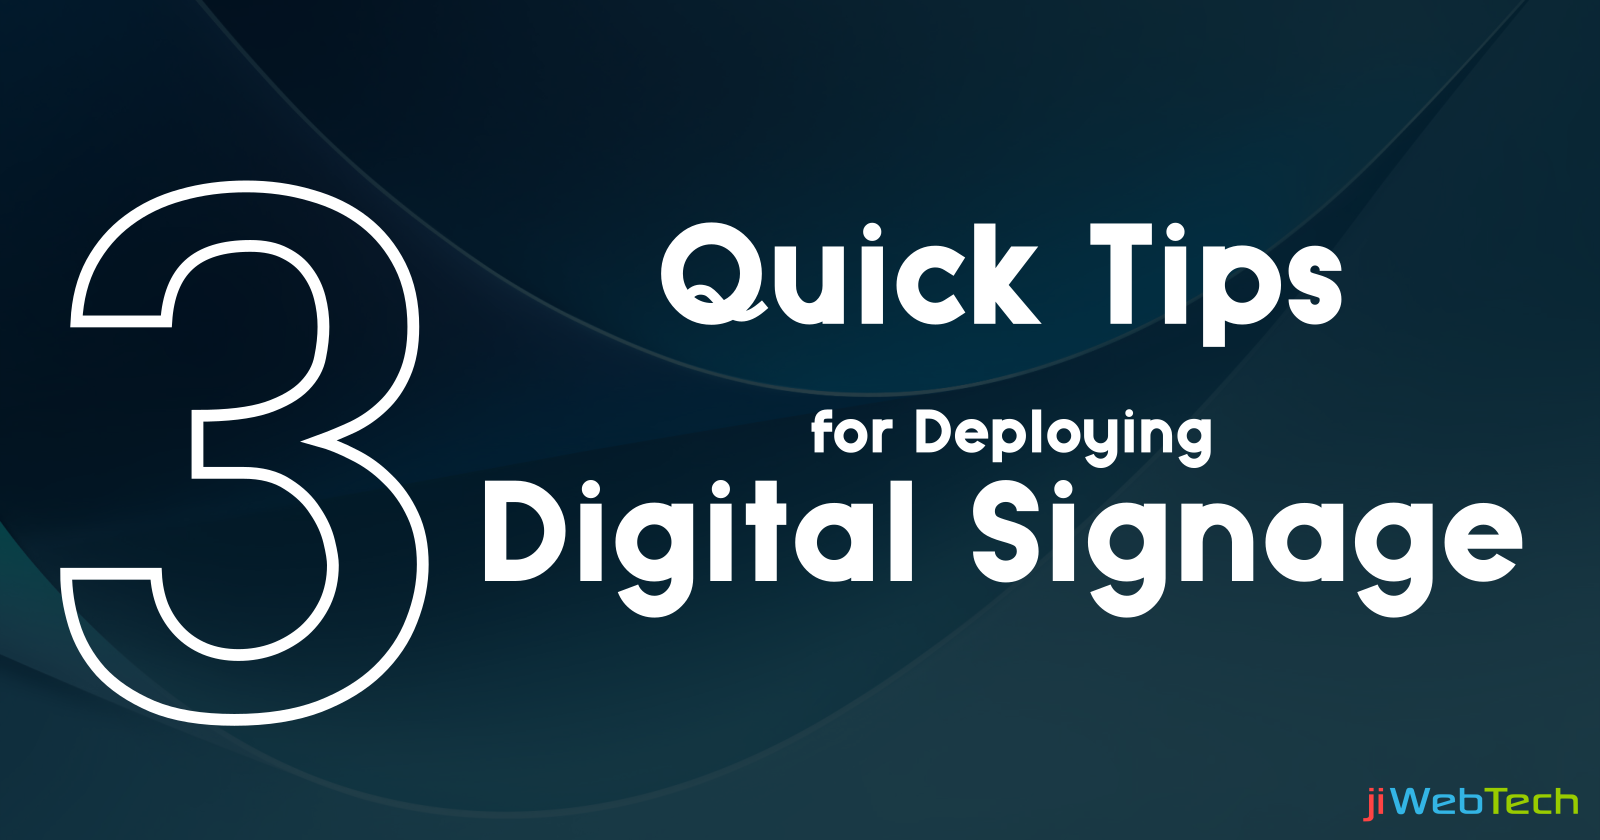 Rules to Keep in Mind Before Deploying a Digital Signage